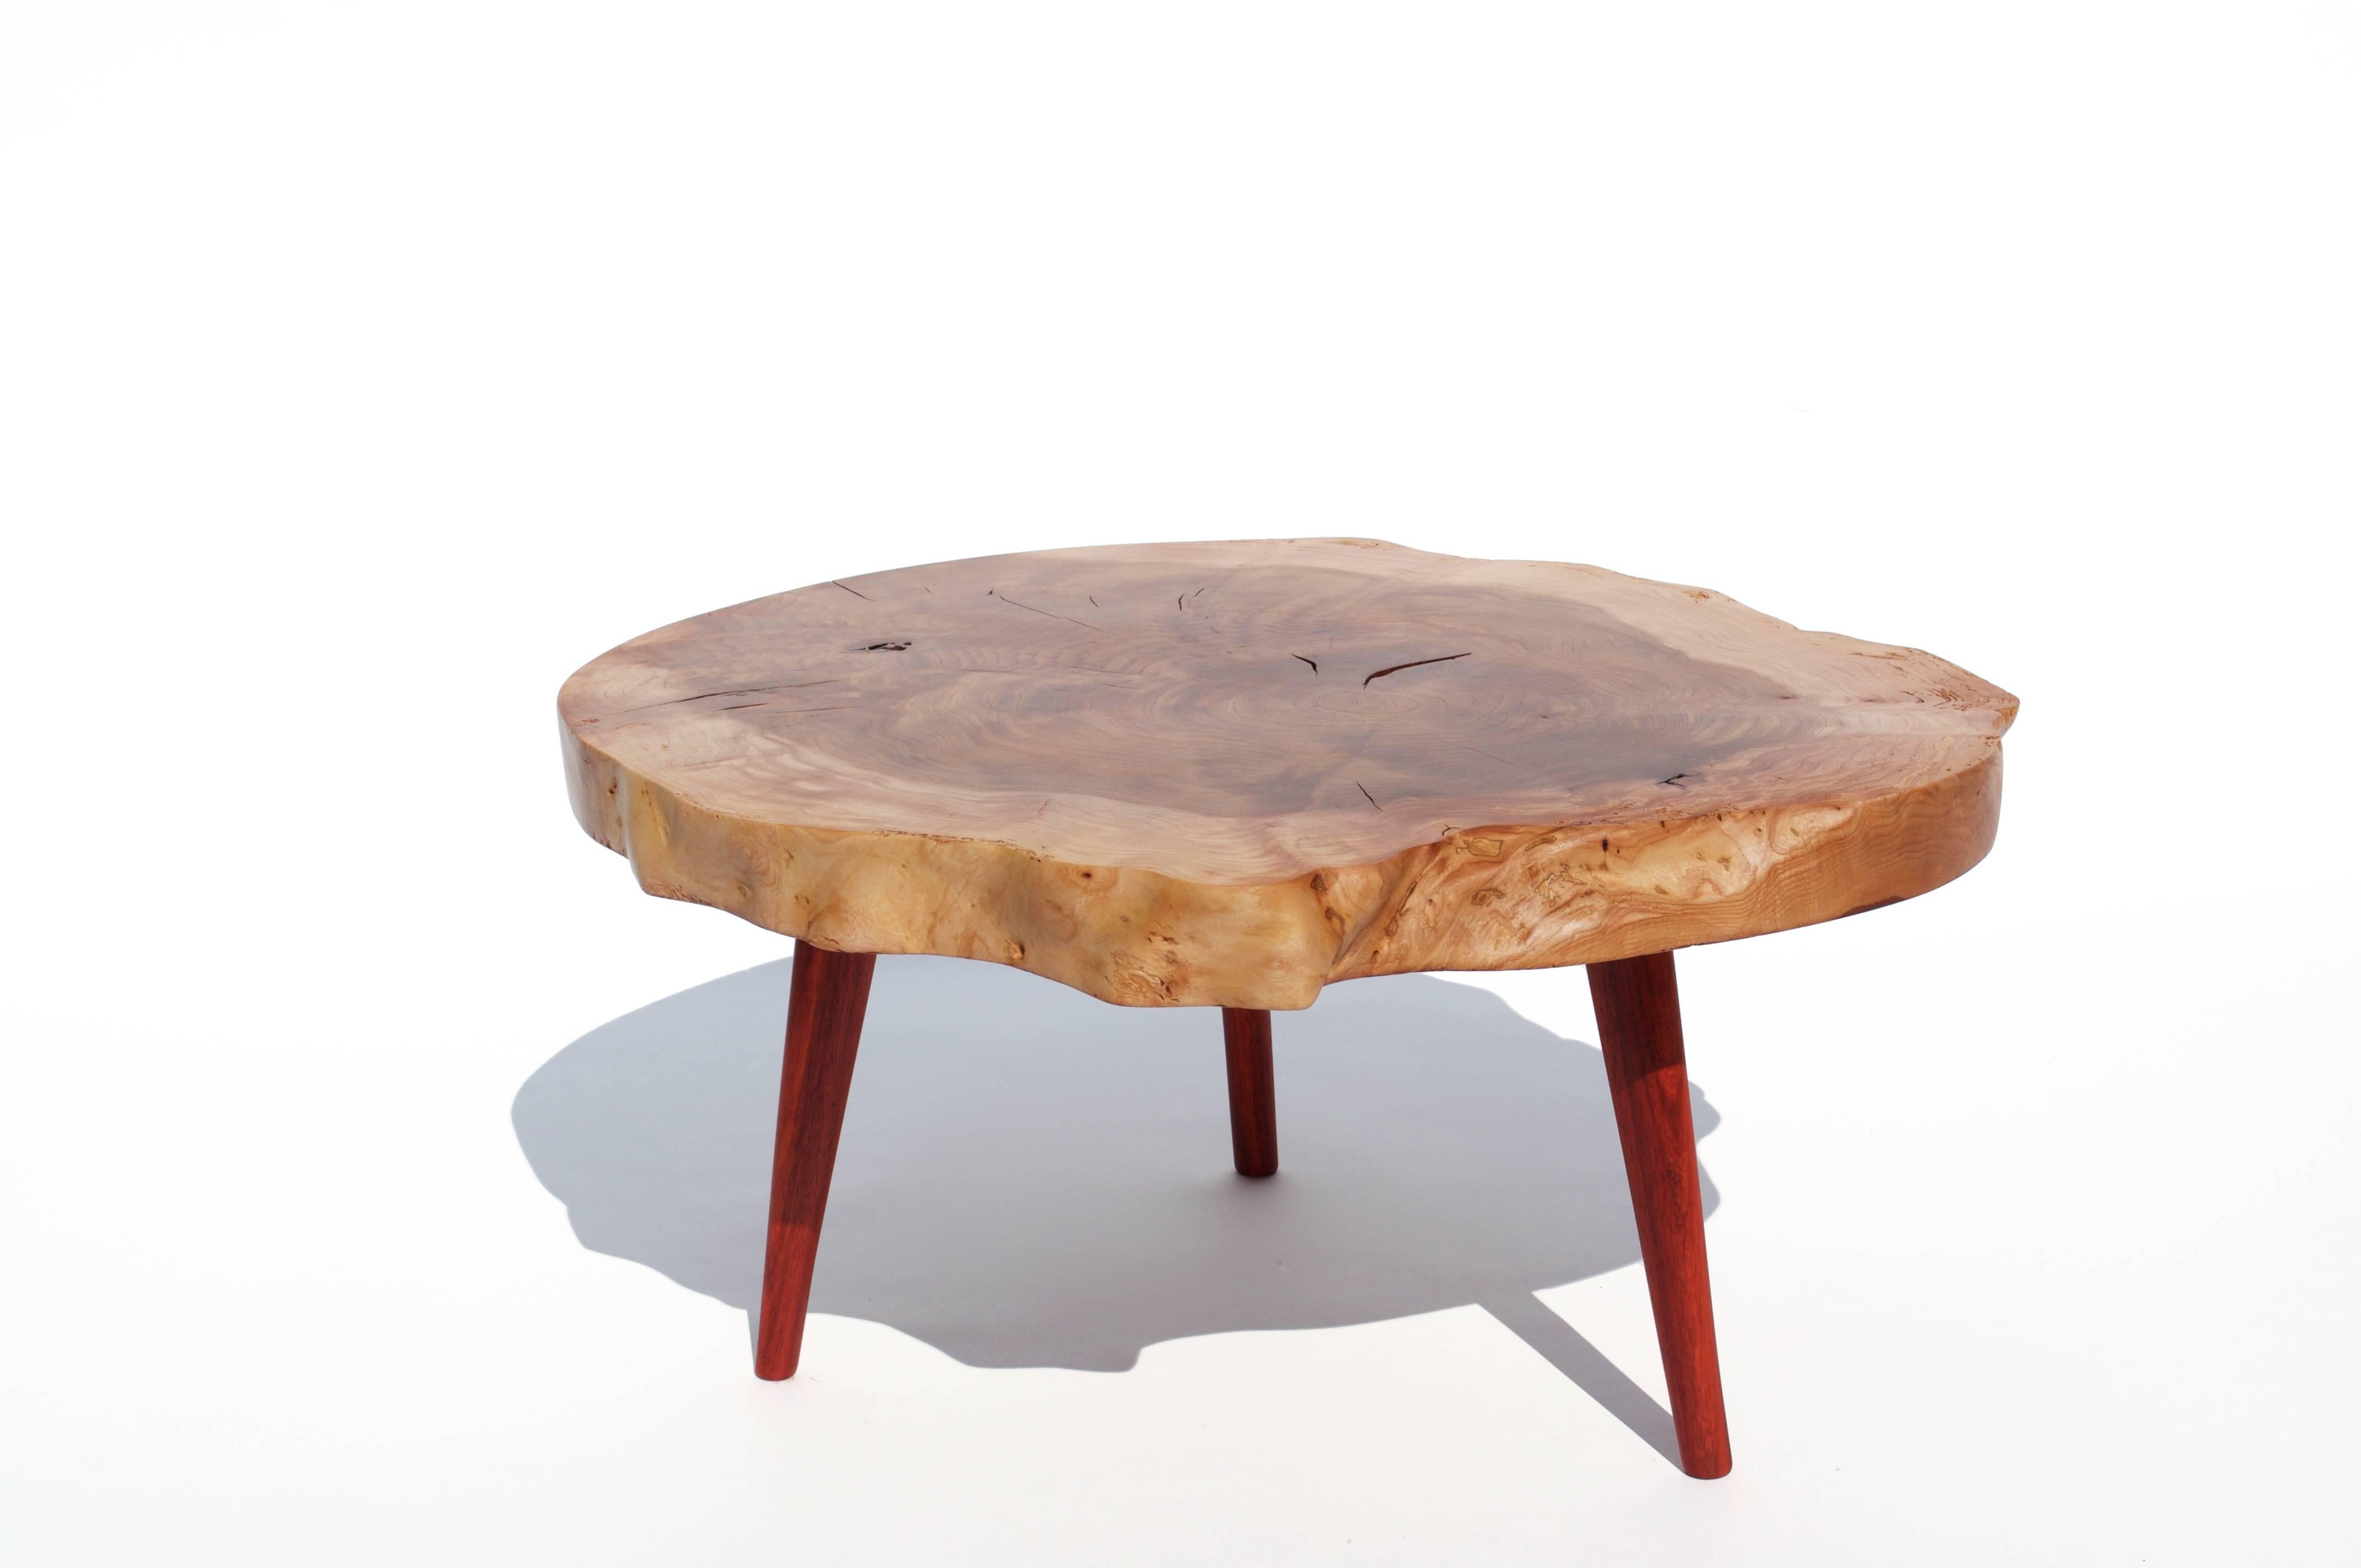 Unique signed table by Jörg Pietschmann
Table ·Ash, Padouk
Measures: H 39 x W 81 x D 74 cm
Polished oil finish.


In Pietschmann’s sculptures, trees that for centuries were part of a landscape and founded in primordial forces tell stories